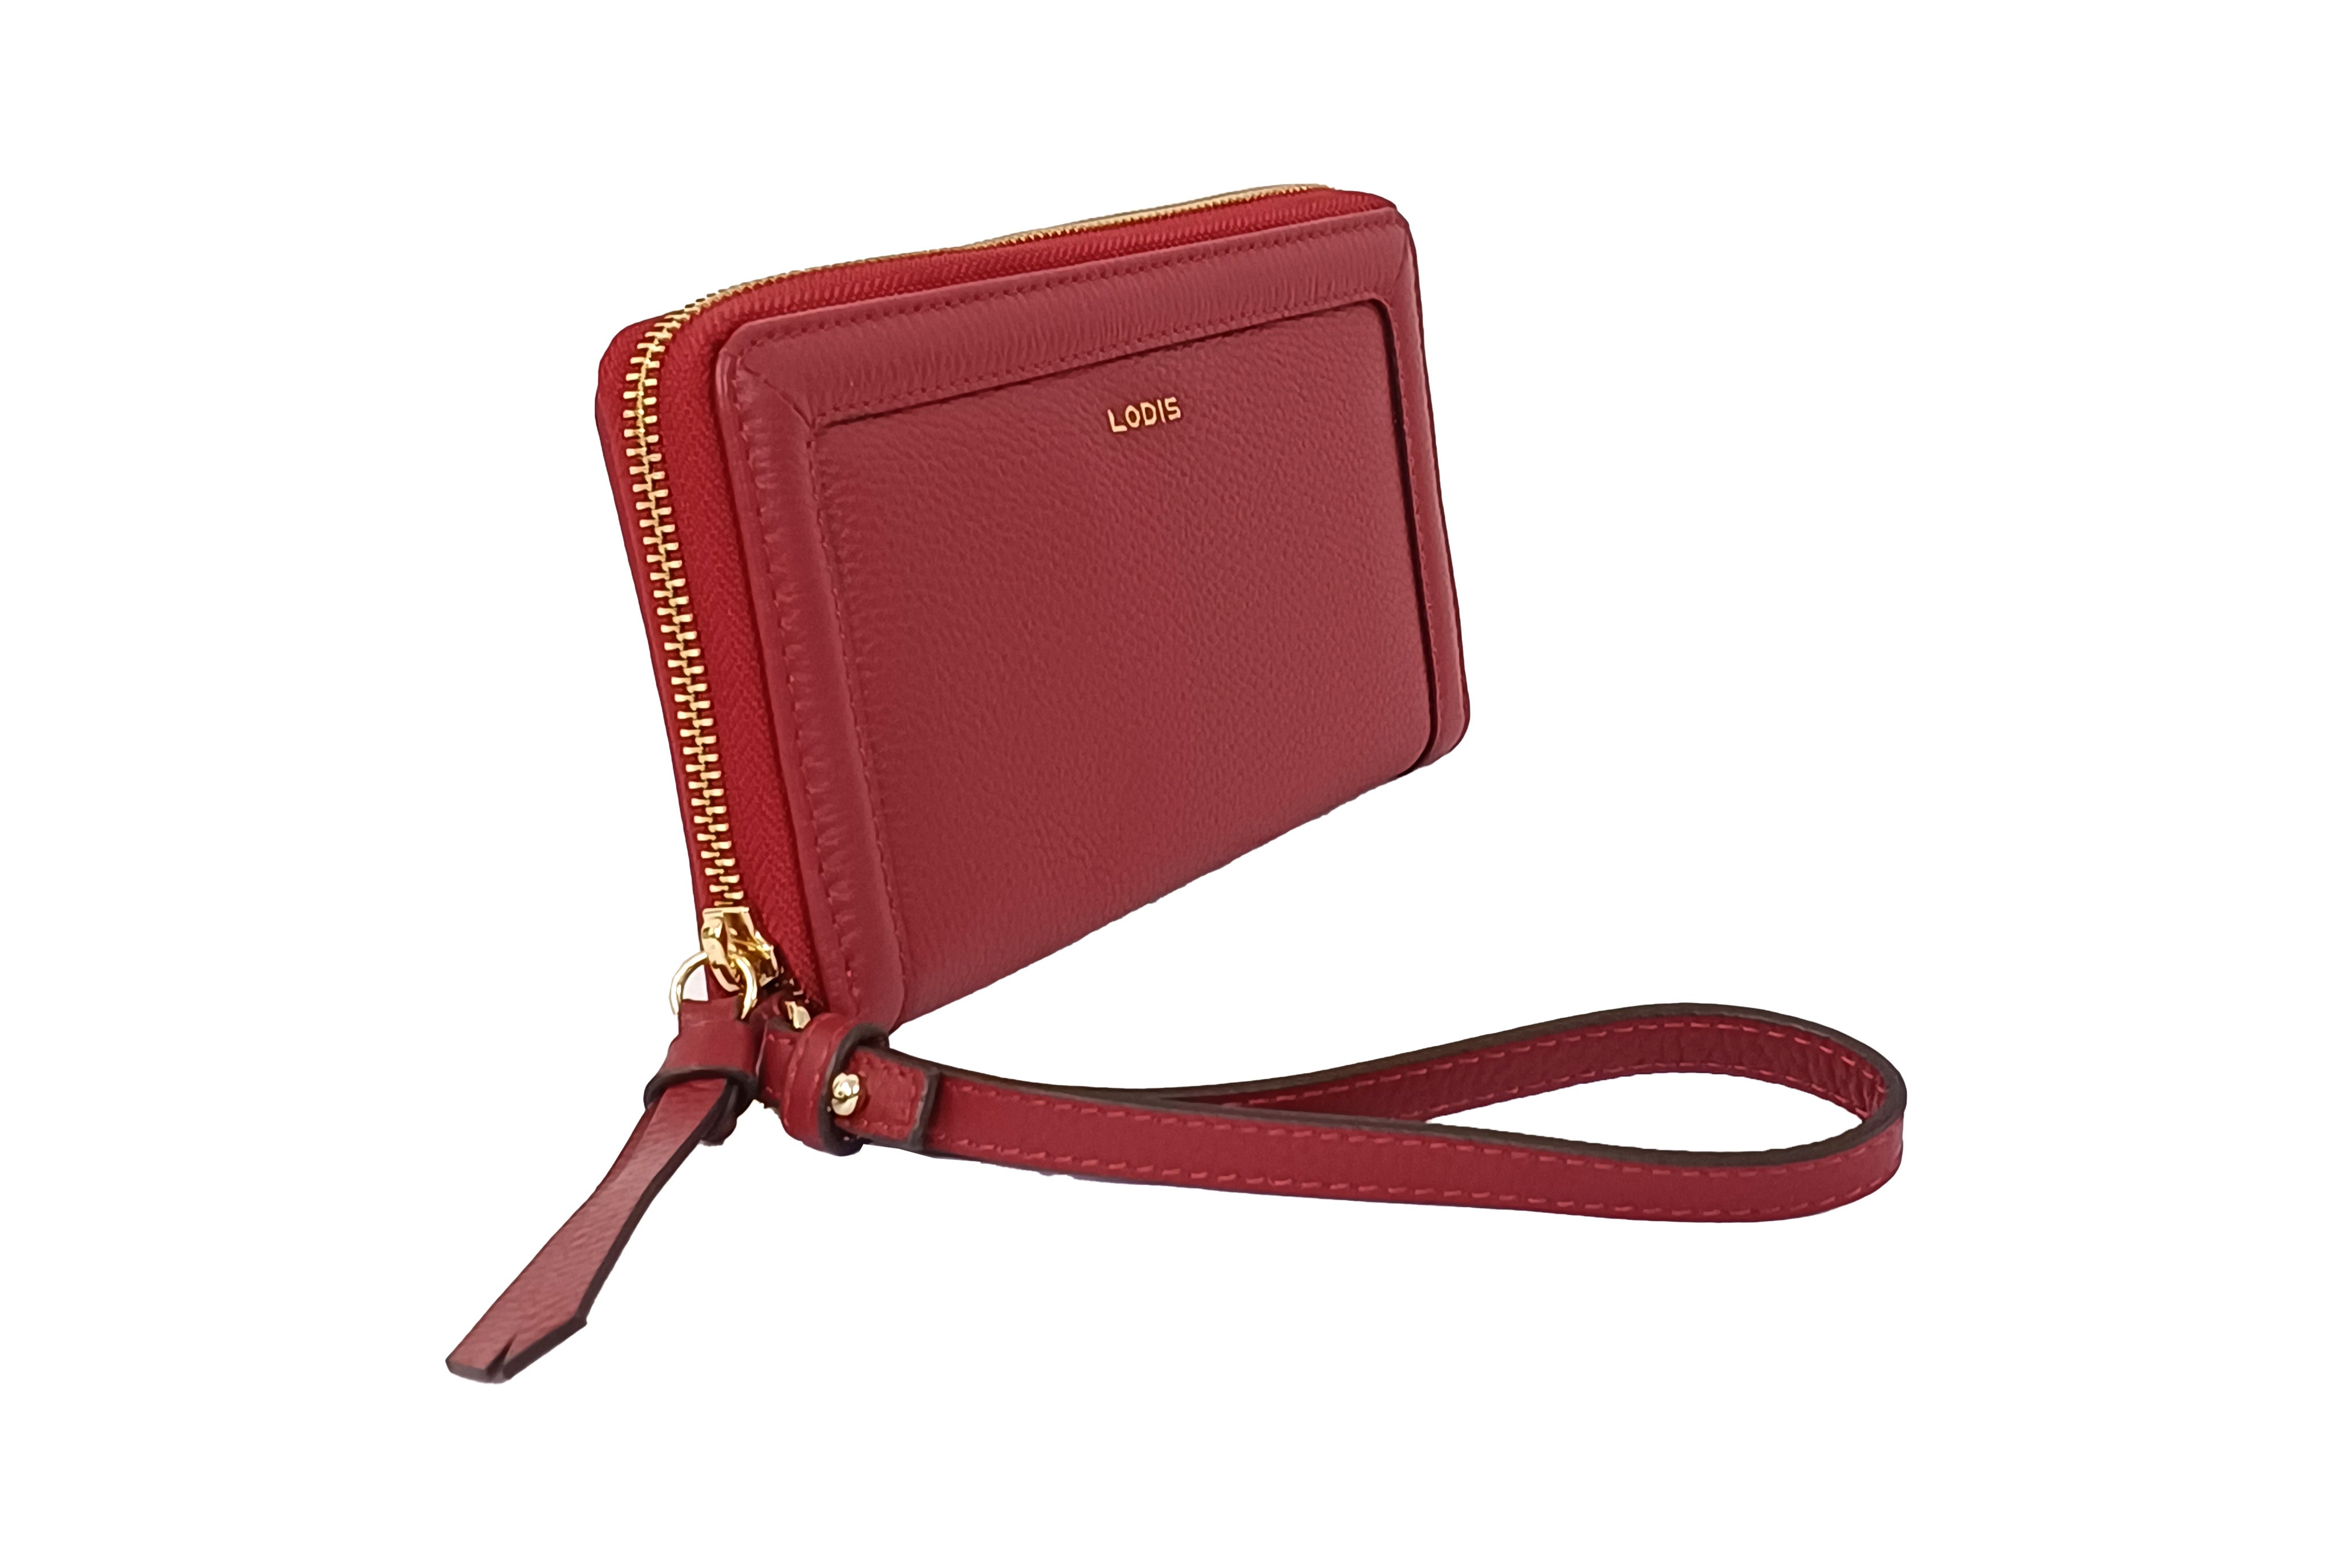 Shop Anna Continental Wallet FromLodis Fall Collection